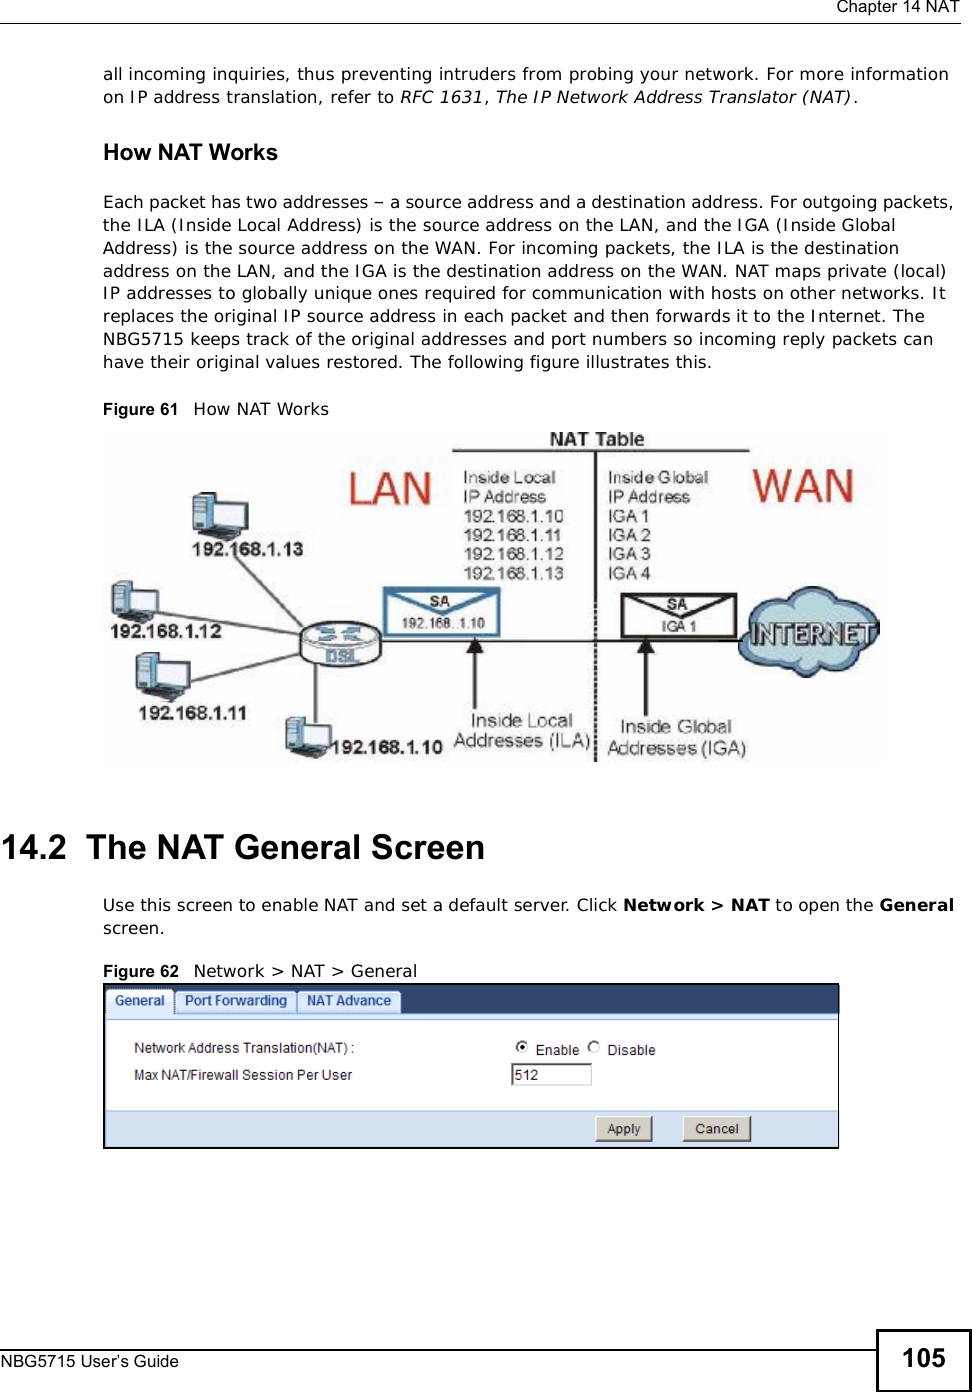  Chapter 14NATNBG5715 User’s Guide 105all incoming inquiries, thus preventing intruders from probing your network. For more information on IP address translation, refer to RFC 1631,The IP Network Address Translator (NAT).How NAT WorksEach packet has two addresses – a source address and a destination address. For outgoing packets, the ILA (Inside Local Address) is the source address on the LAN, and the IGA (Inside Global Address) is the source address on the WAN. For incoming packets, the ILA is the destination address on the LAN, and the IGA is the destination address on the WAN. NAT maps private (local) IP addresses to globally unique ones required for communication with hosts on other networks. It replaces the original IP source address in each packet and then forwards it to the Internet. The NBG5715 keeps track of the original addresses and port numbers so incoming reply packets can have their original values restored. The following figure illustrates this.Figure 61   How NAT Works14.2  The NAT General ScreenUse this screen to enable NAT and set a default server. Click Network &gt; NAT to open the Generalscreen.Figure 62   Network &gt; NAT &gt; General 